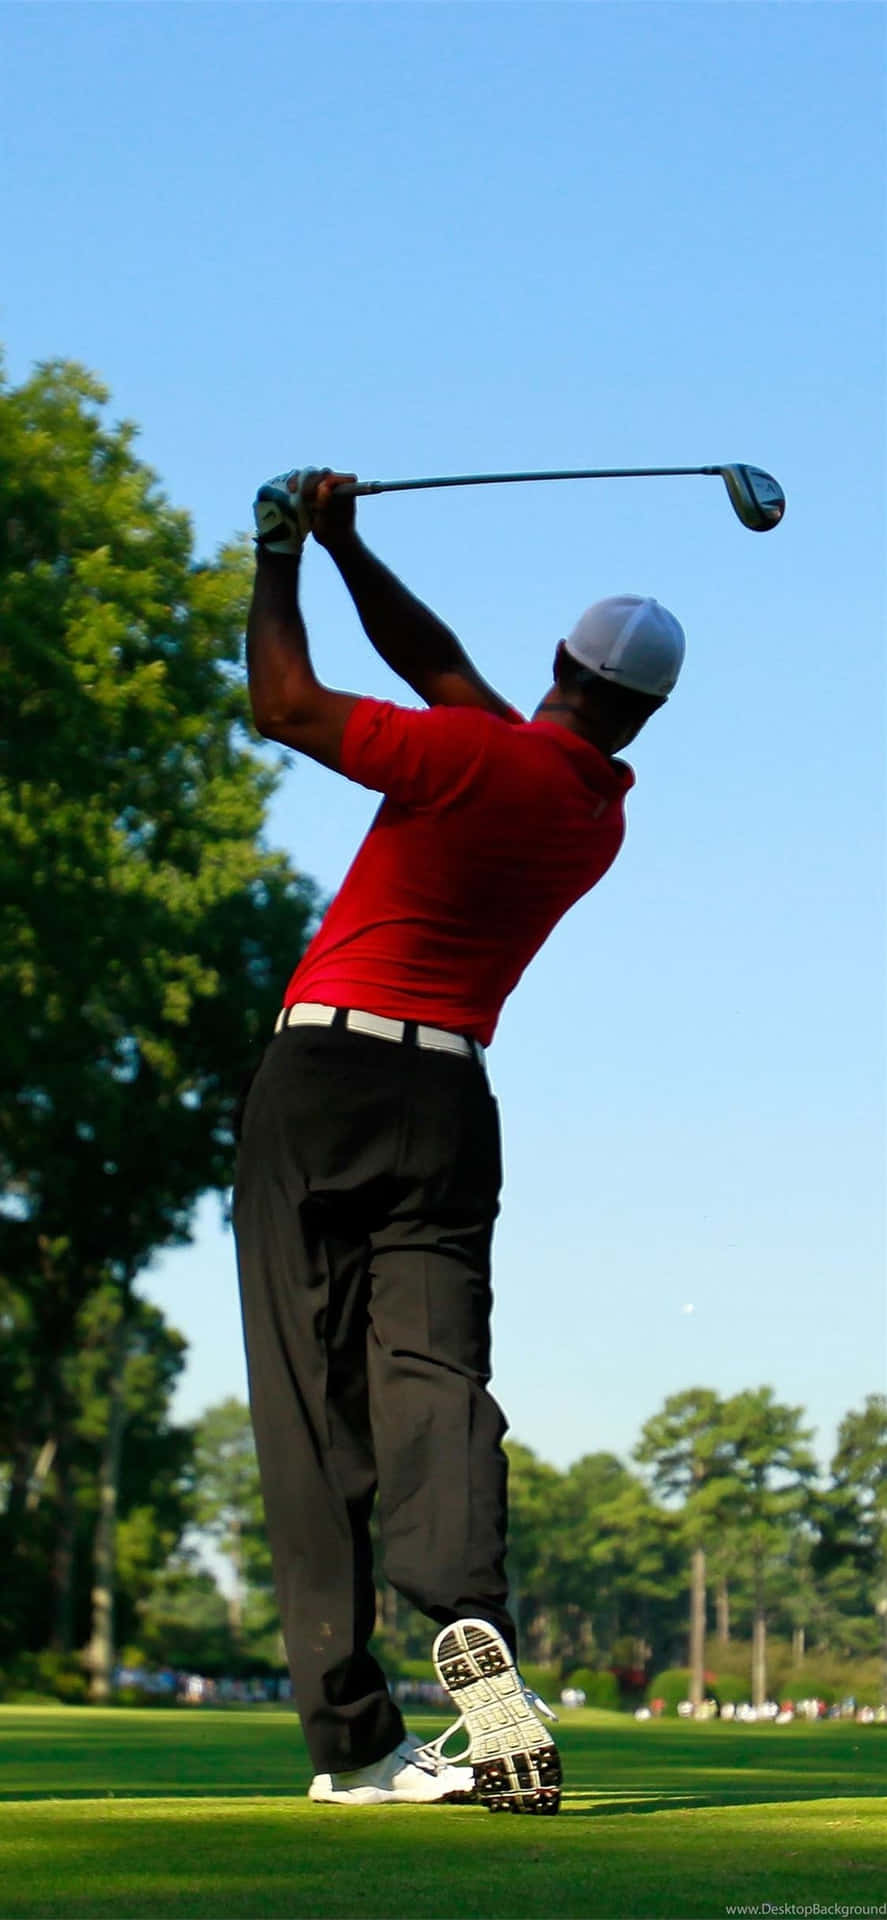 The Back Of Tiger Woods Iphone Wallpaper